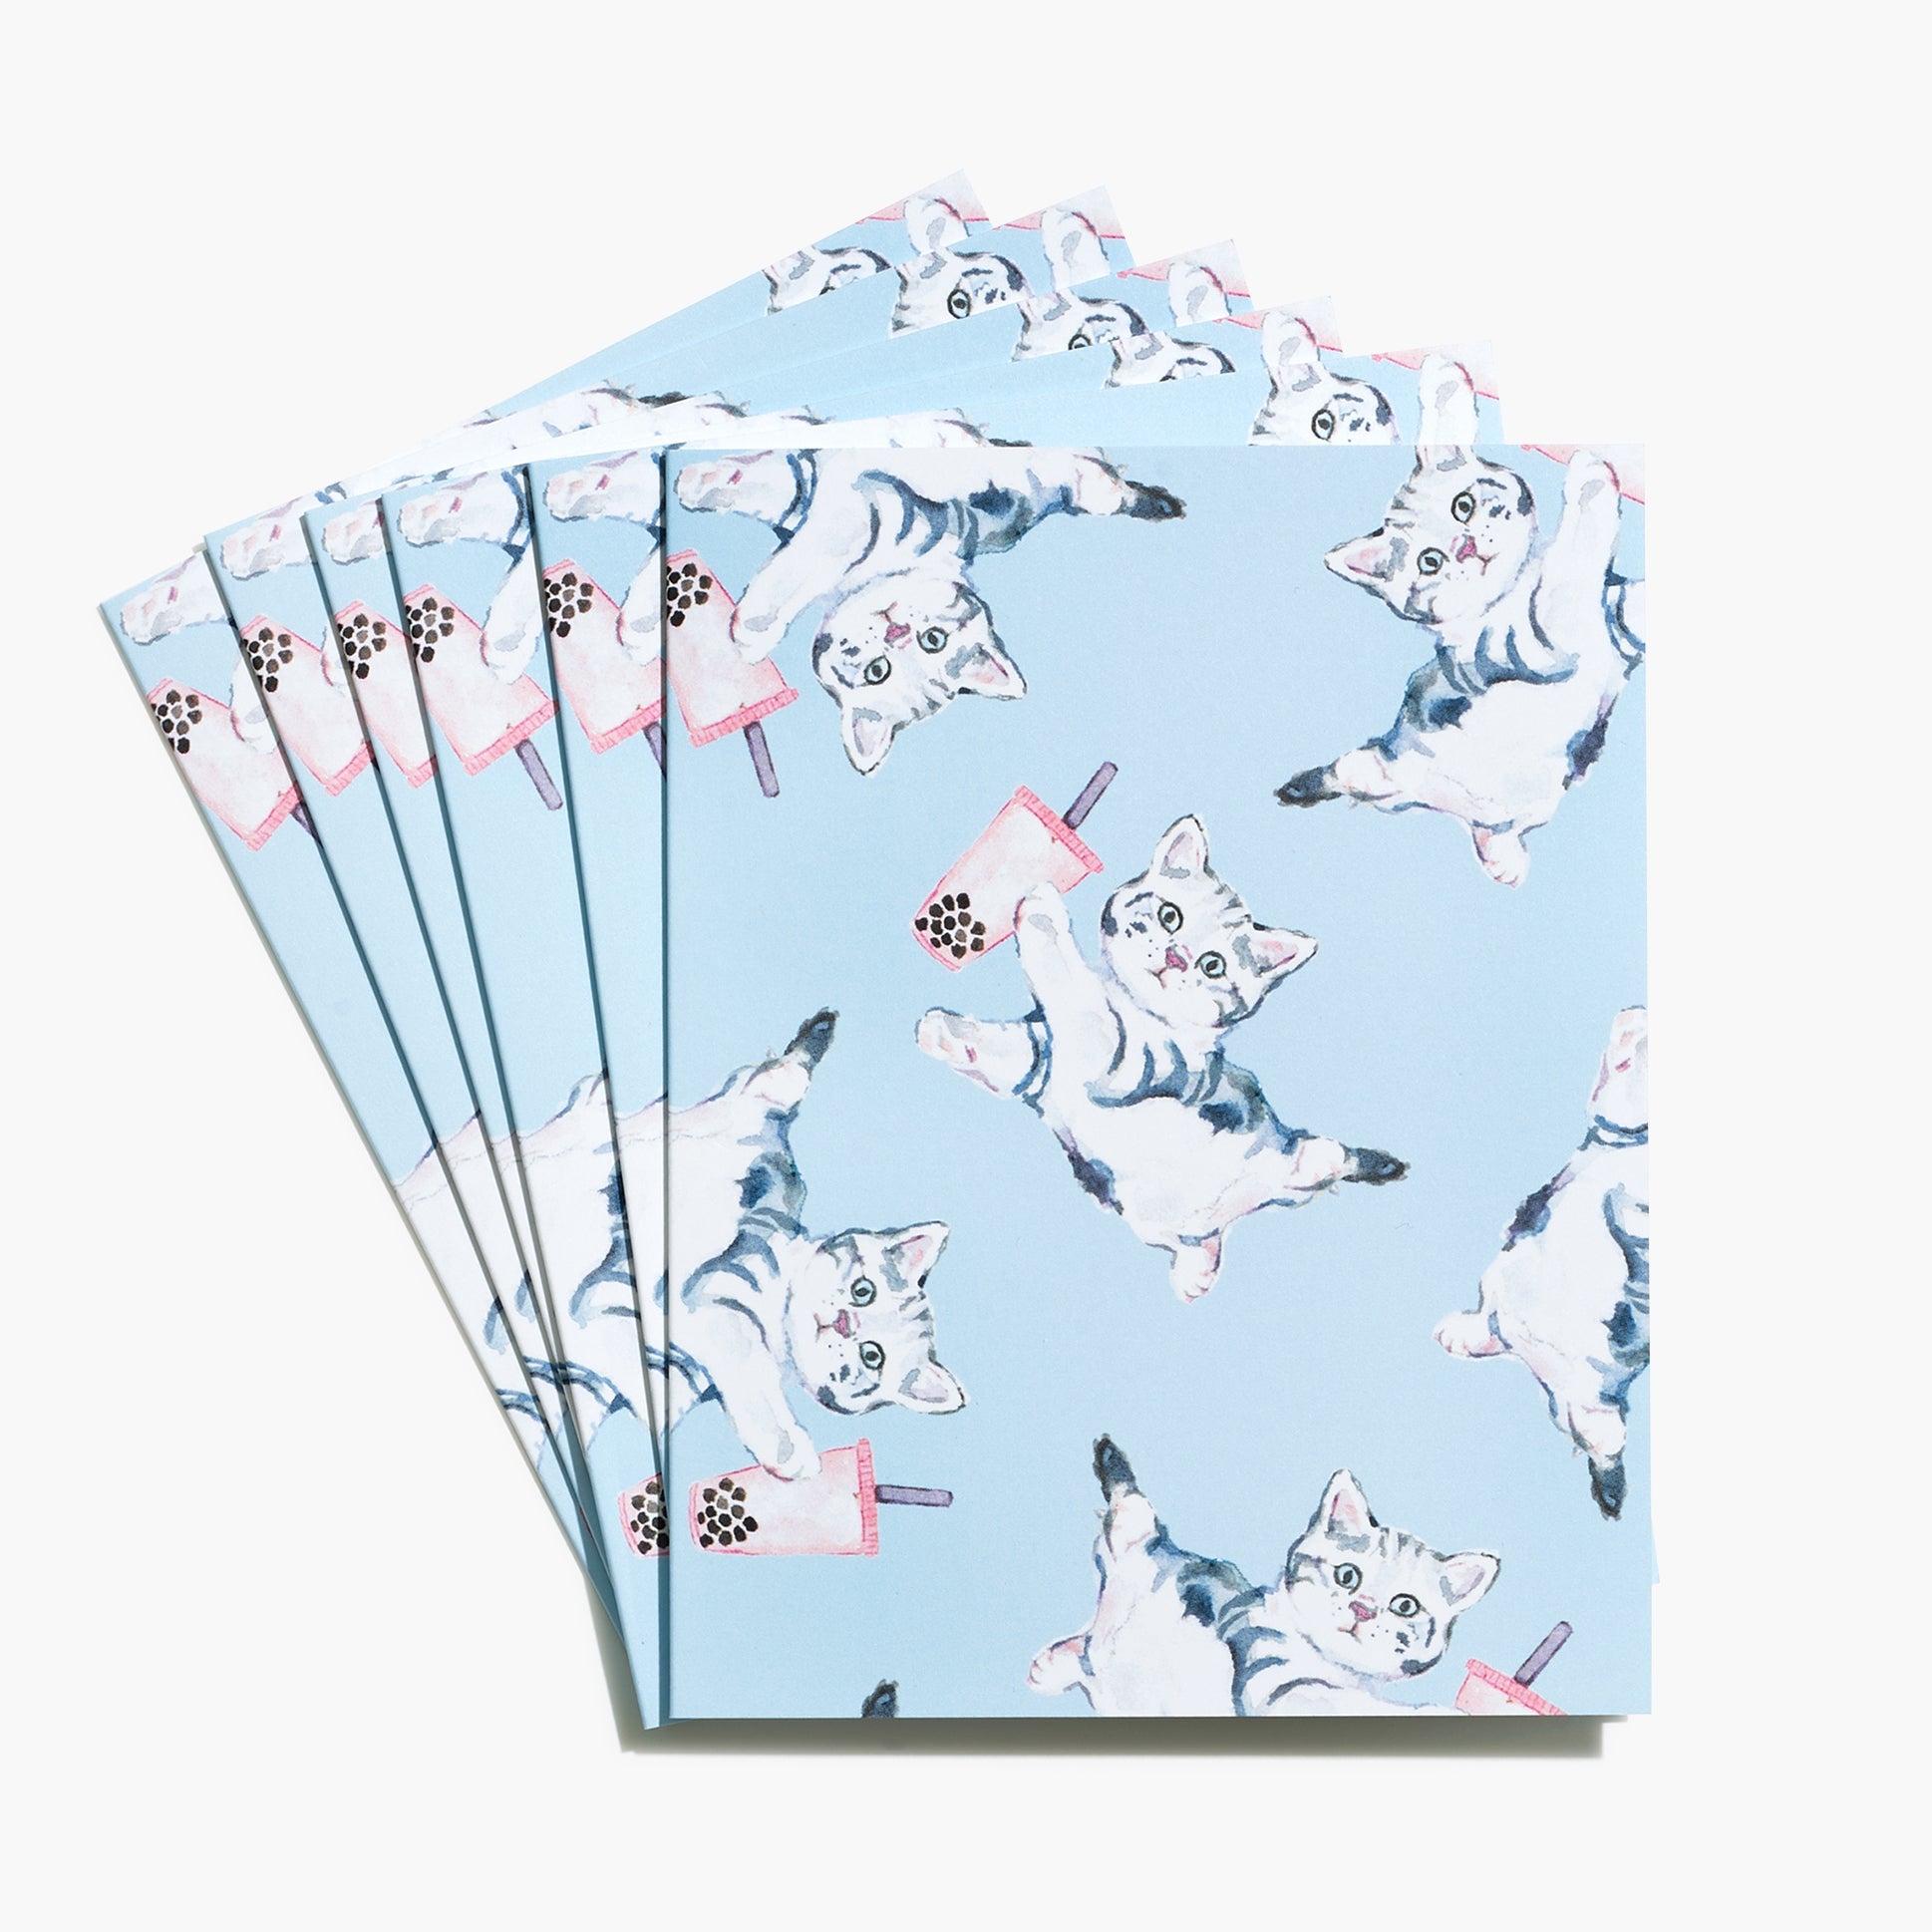 Bubble Tea Greeting Cards - Set of 6